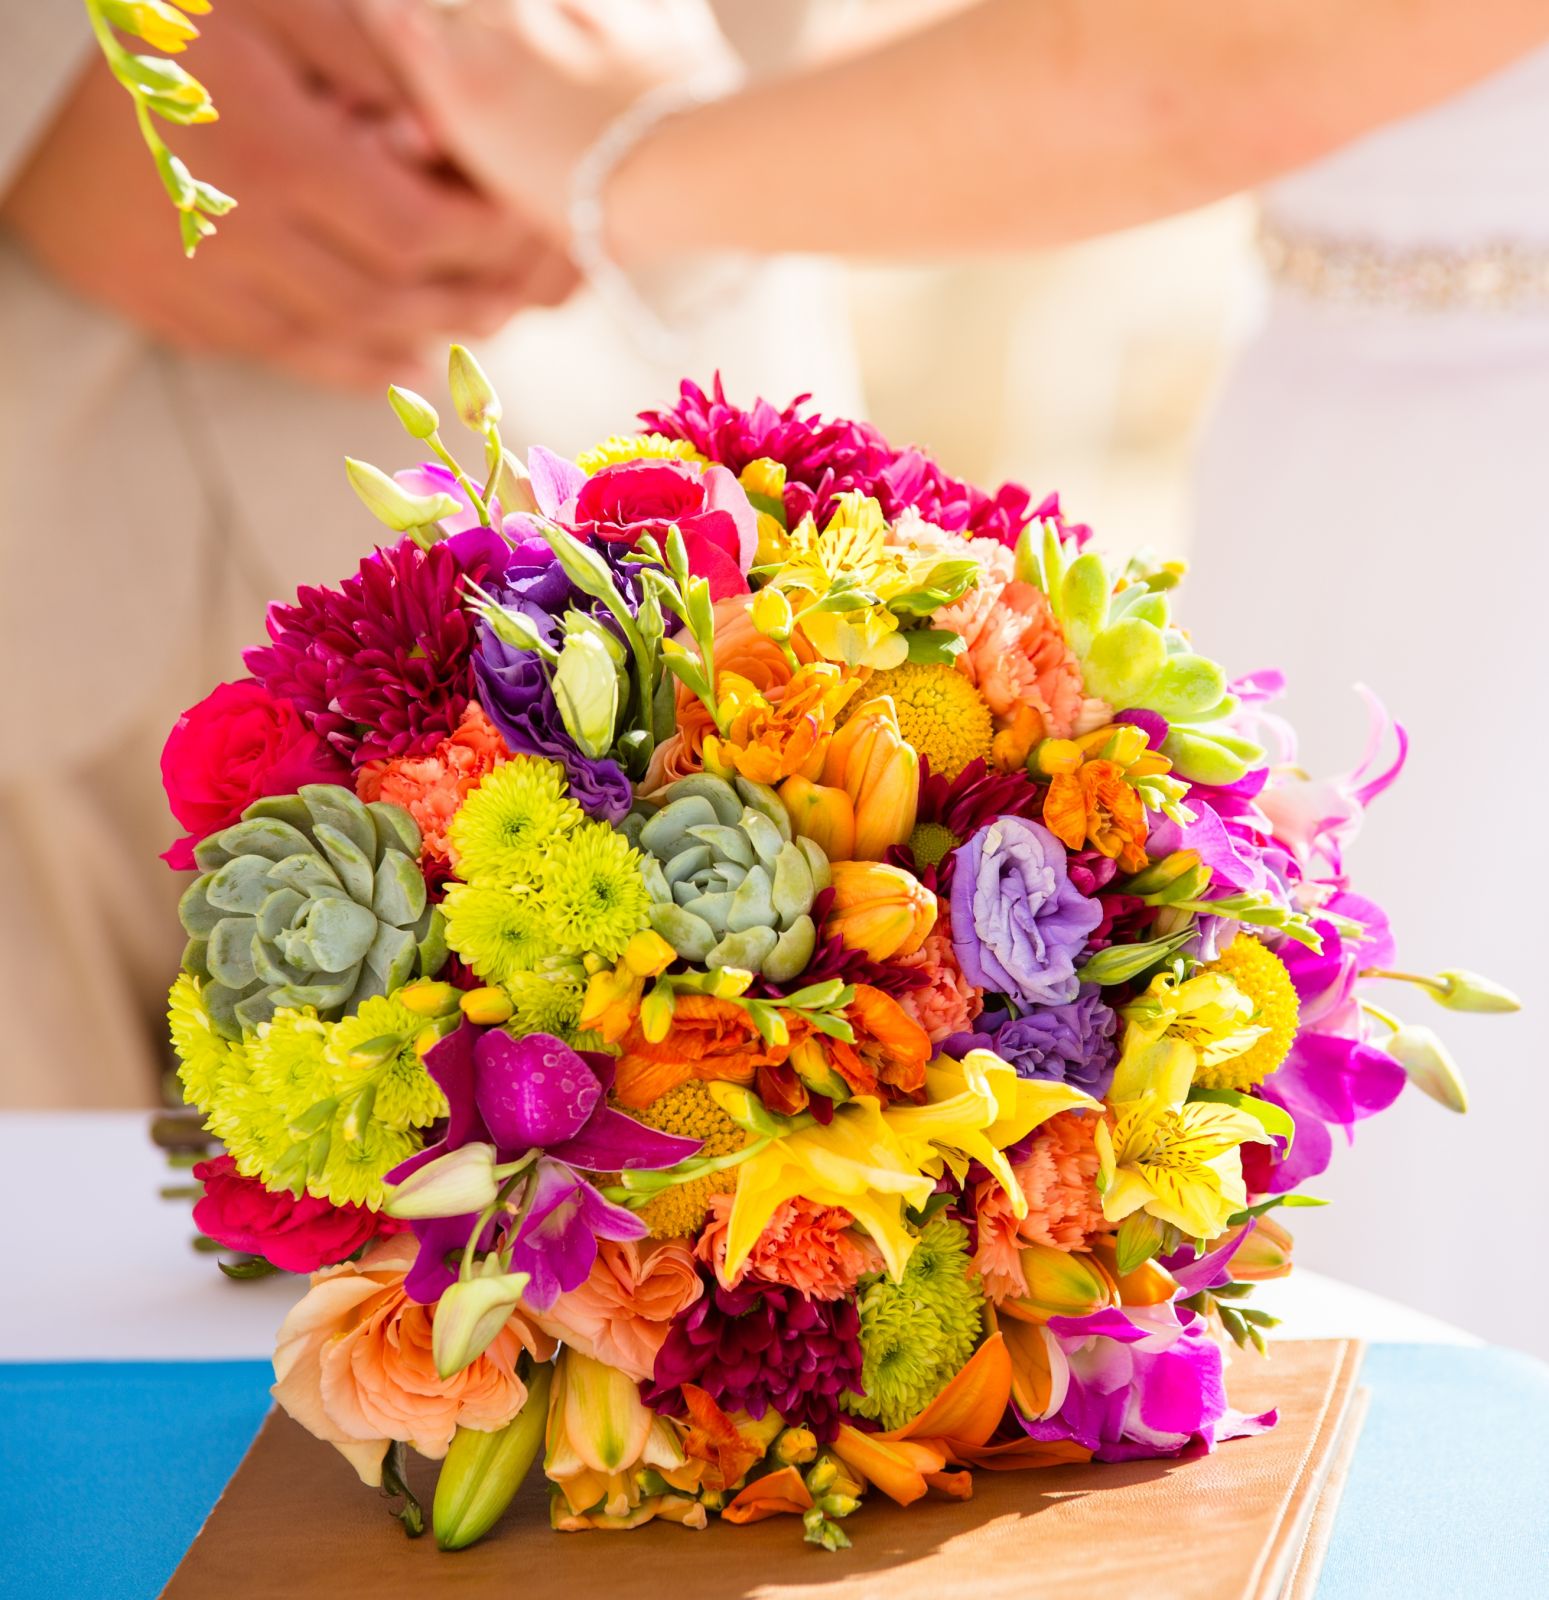 wedding flowers / bridal bouquet and decoration